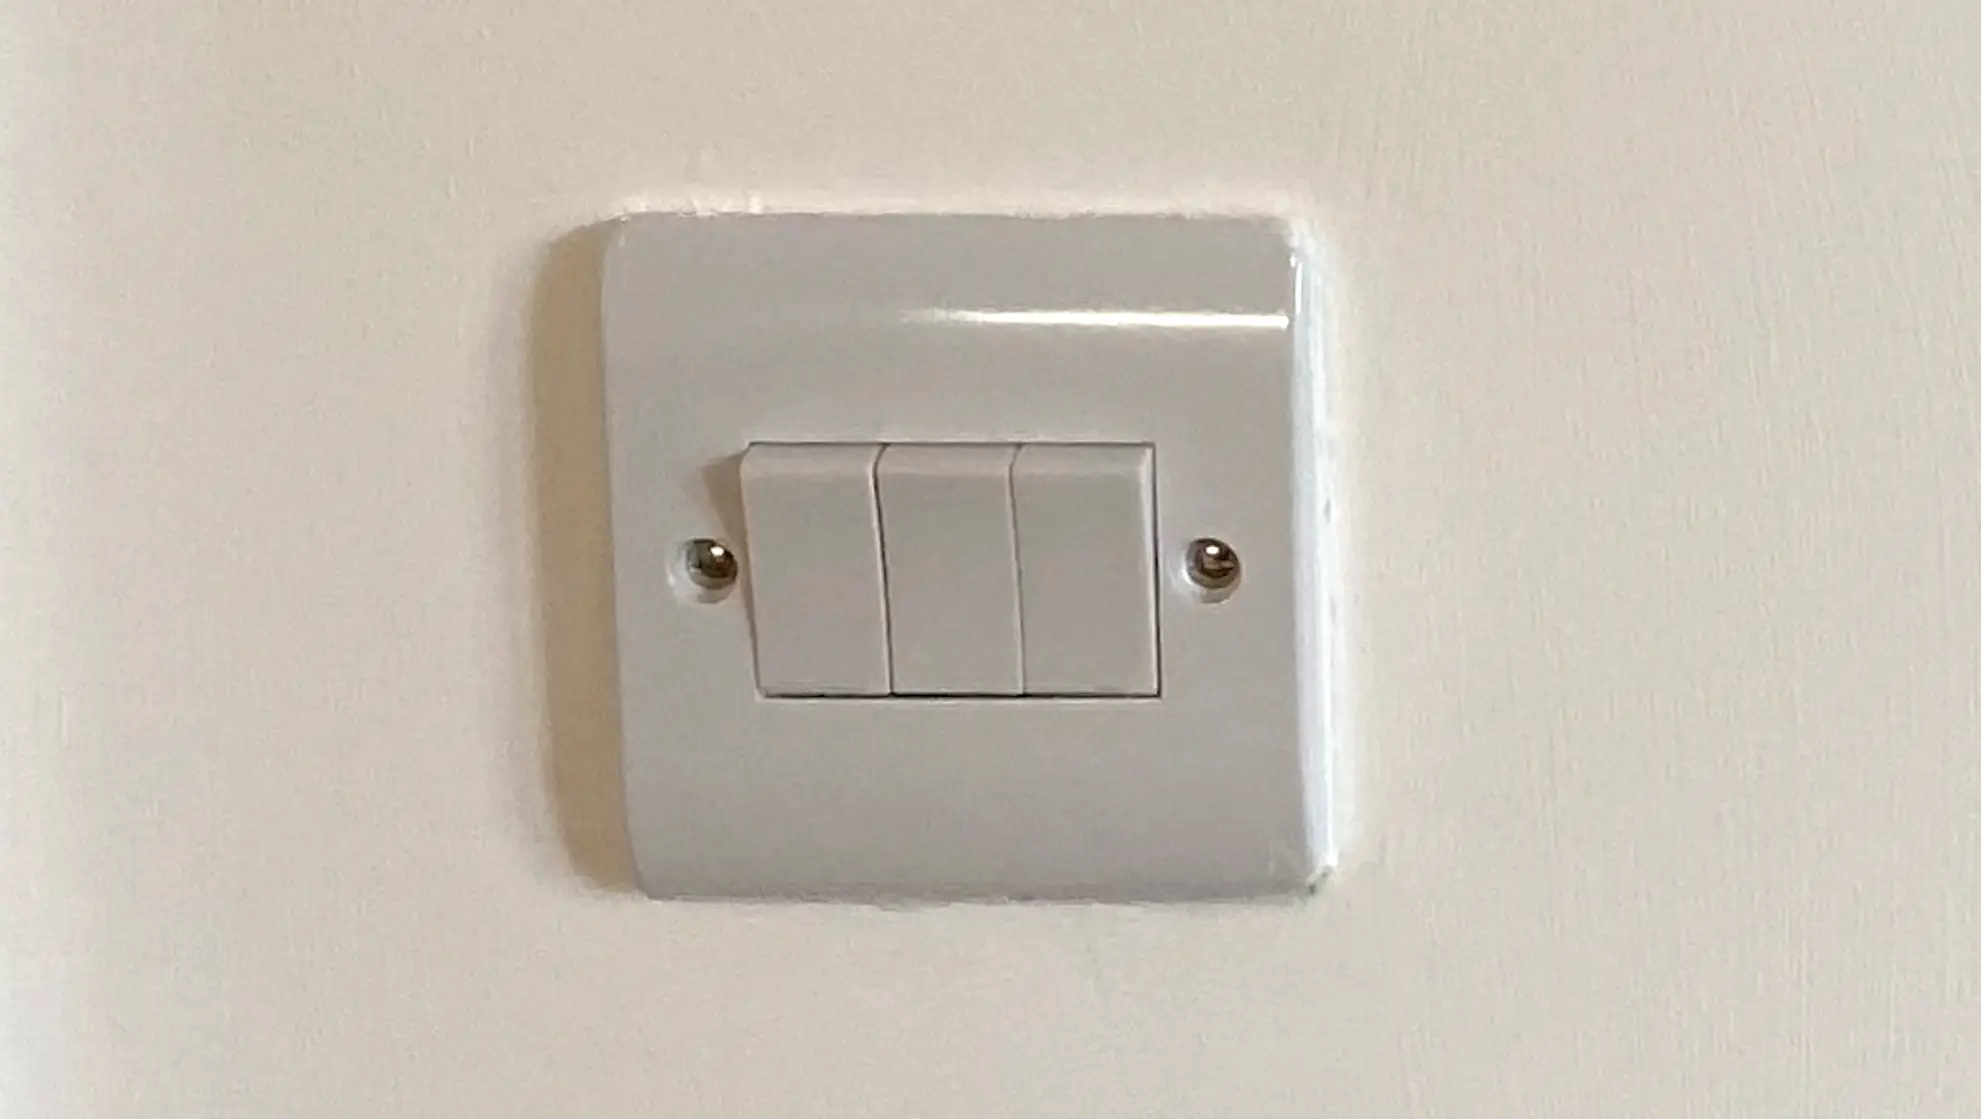 Cost to install or fix a light switch